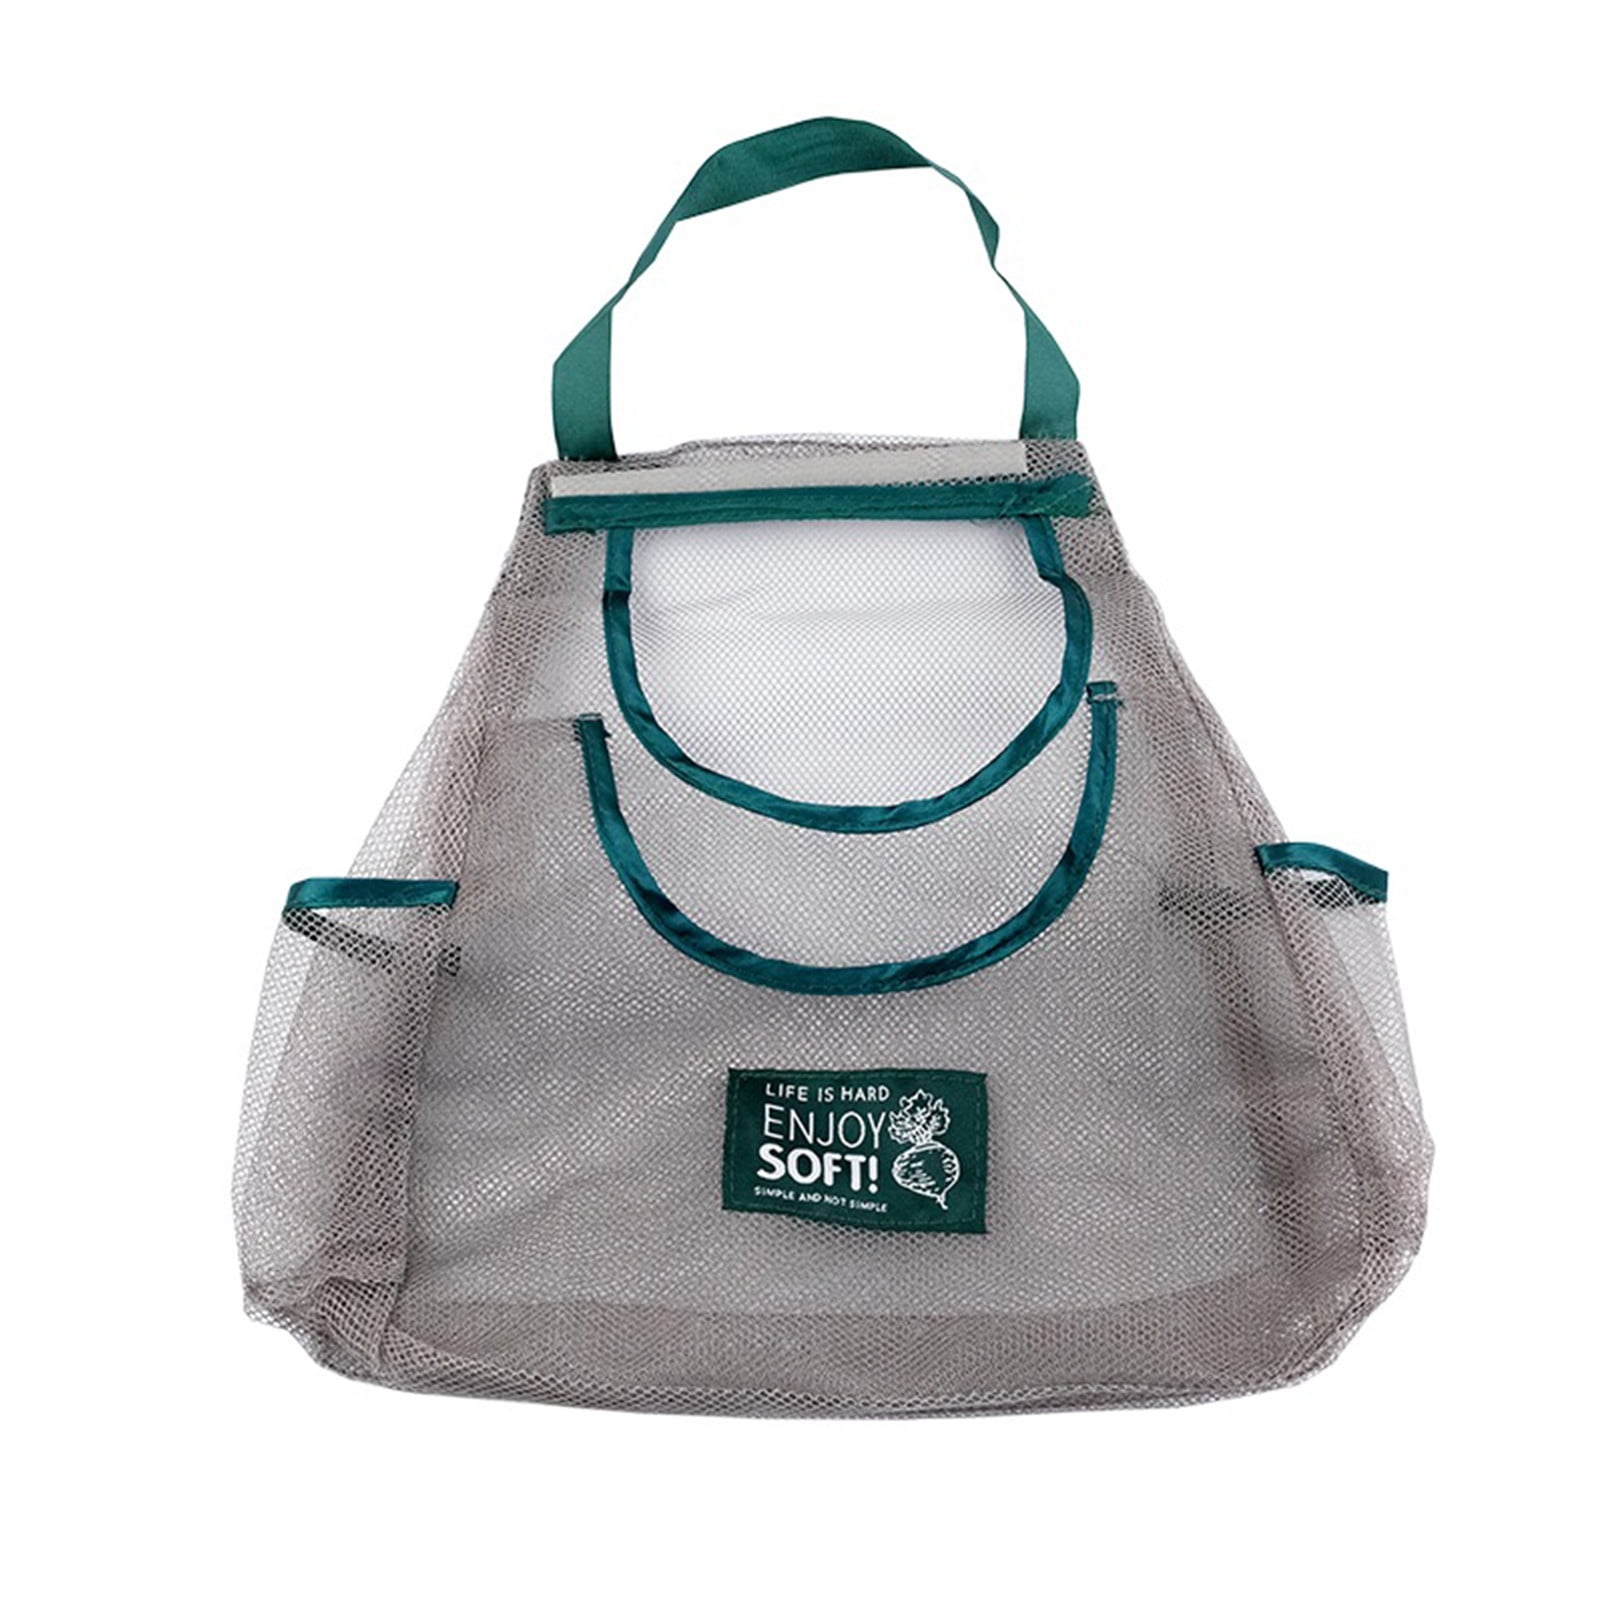 Large Non-Woven Tote Bag w/Side Pockets